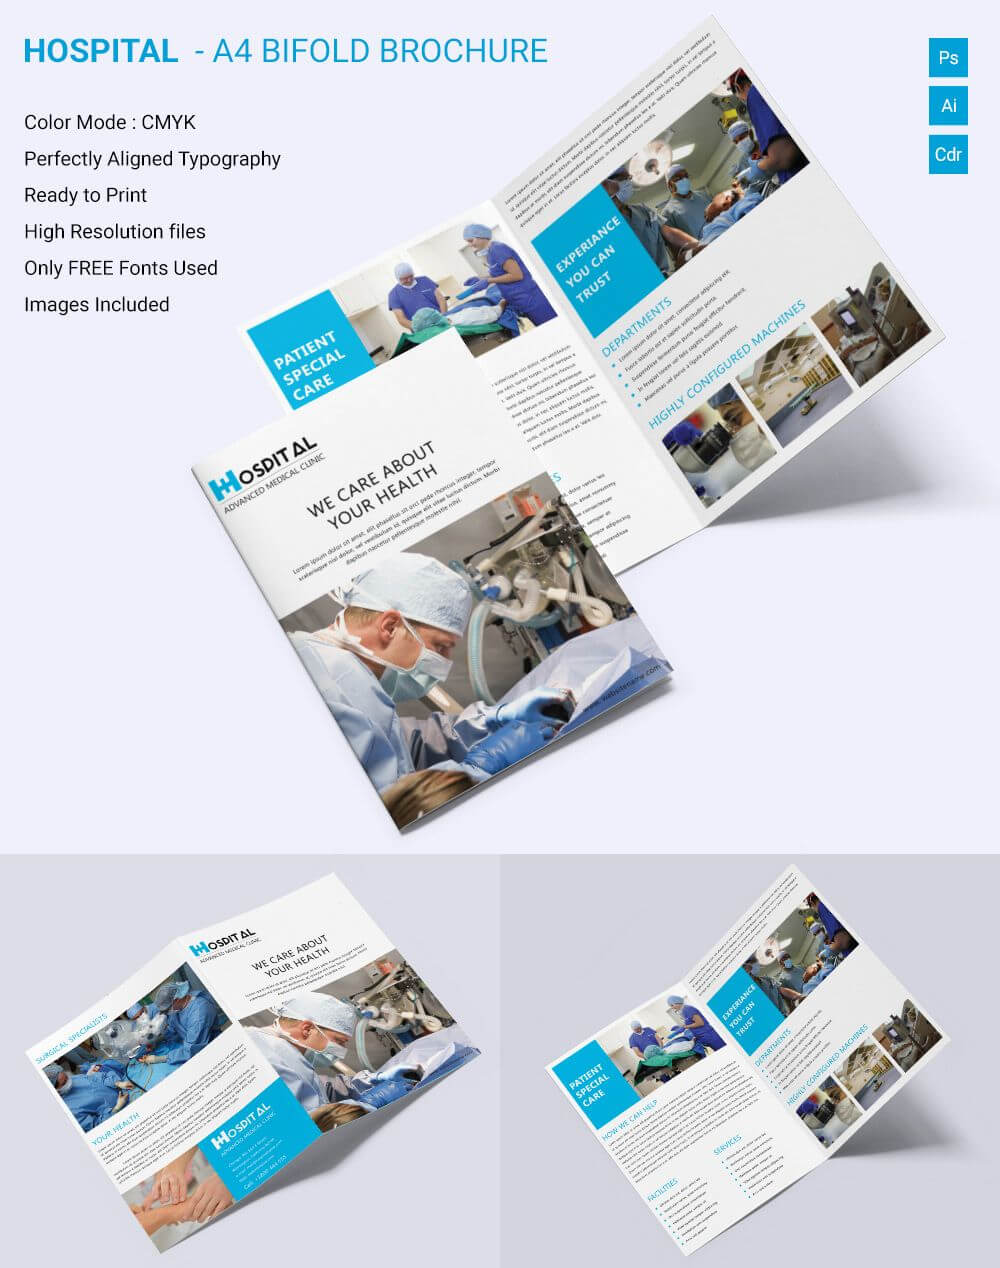 Medical Brochure Template Â€“ 39+ Free Psd, Ai, Vector Eps Throughout Brochure Template Illustrator Free Download